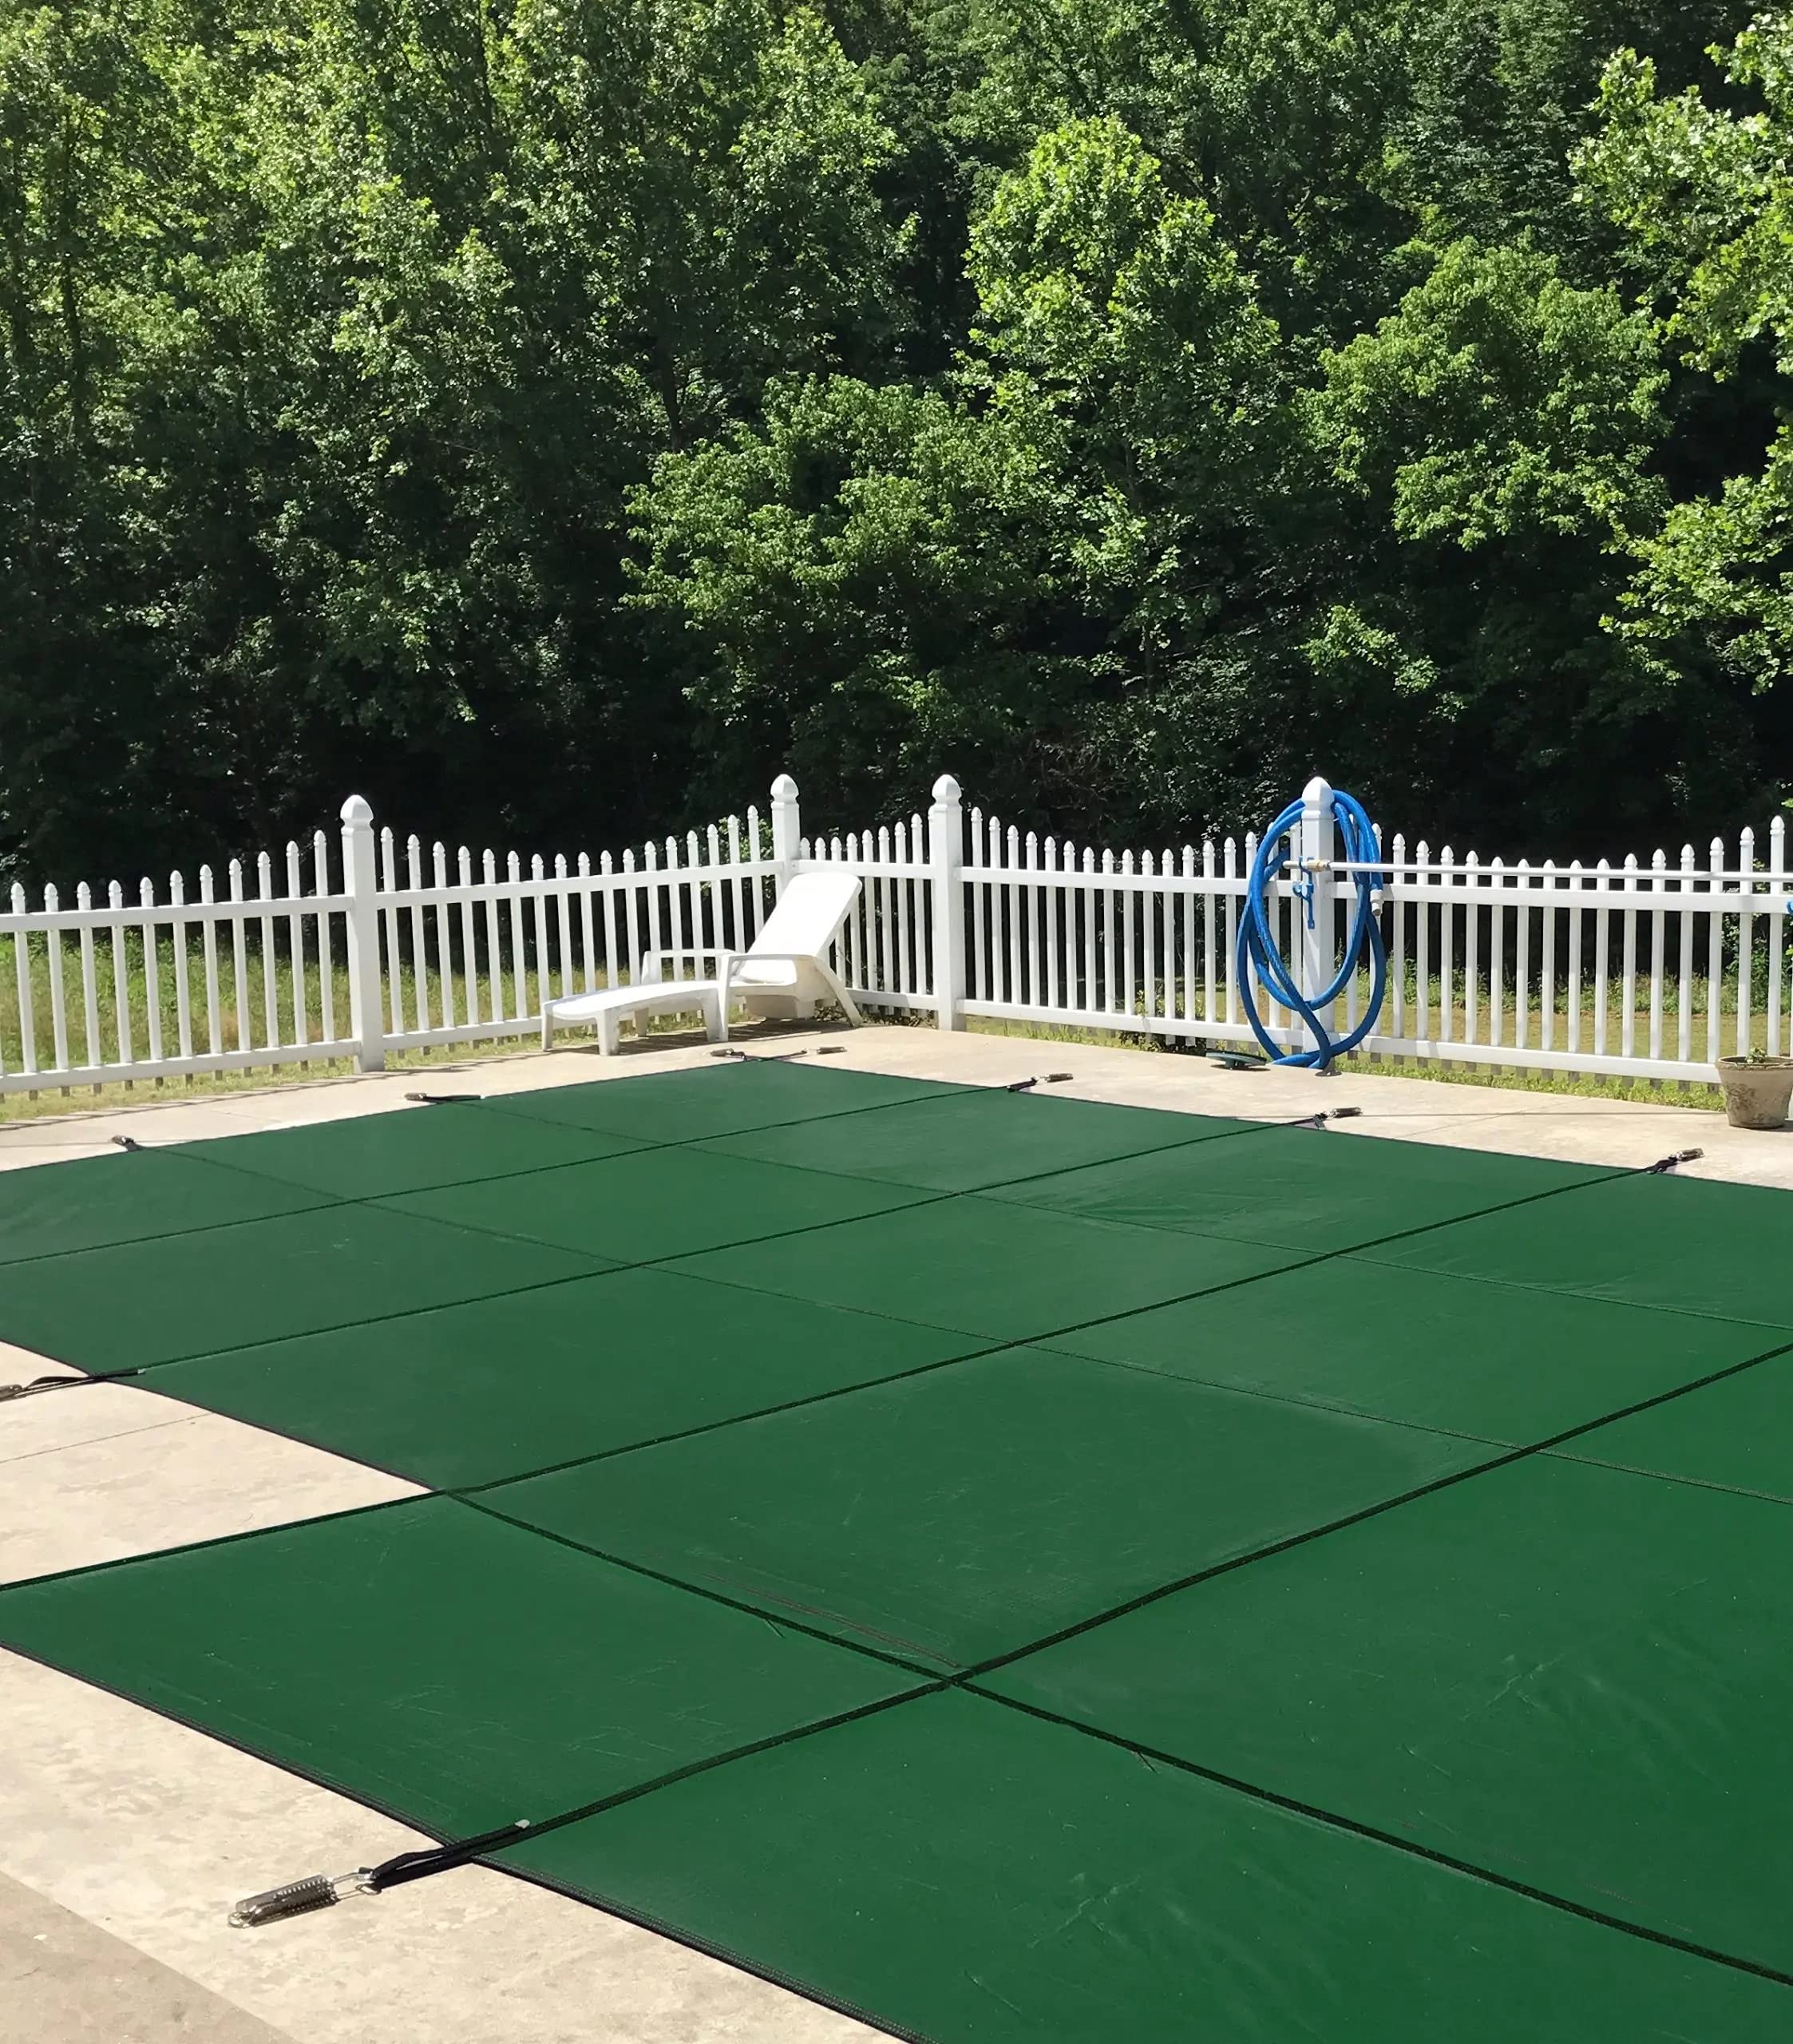 20' x 40' WaterWarden Pool Safety Cover for Inground Pool Hardware Included, Green Mesh $323.42 + Free Shipping